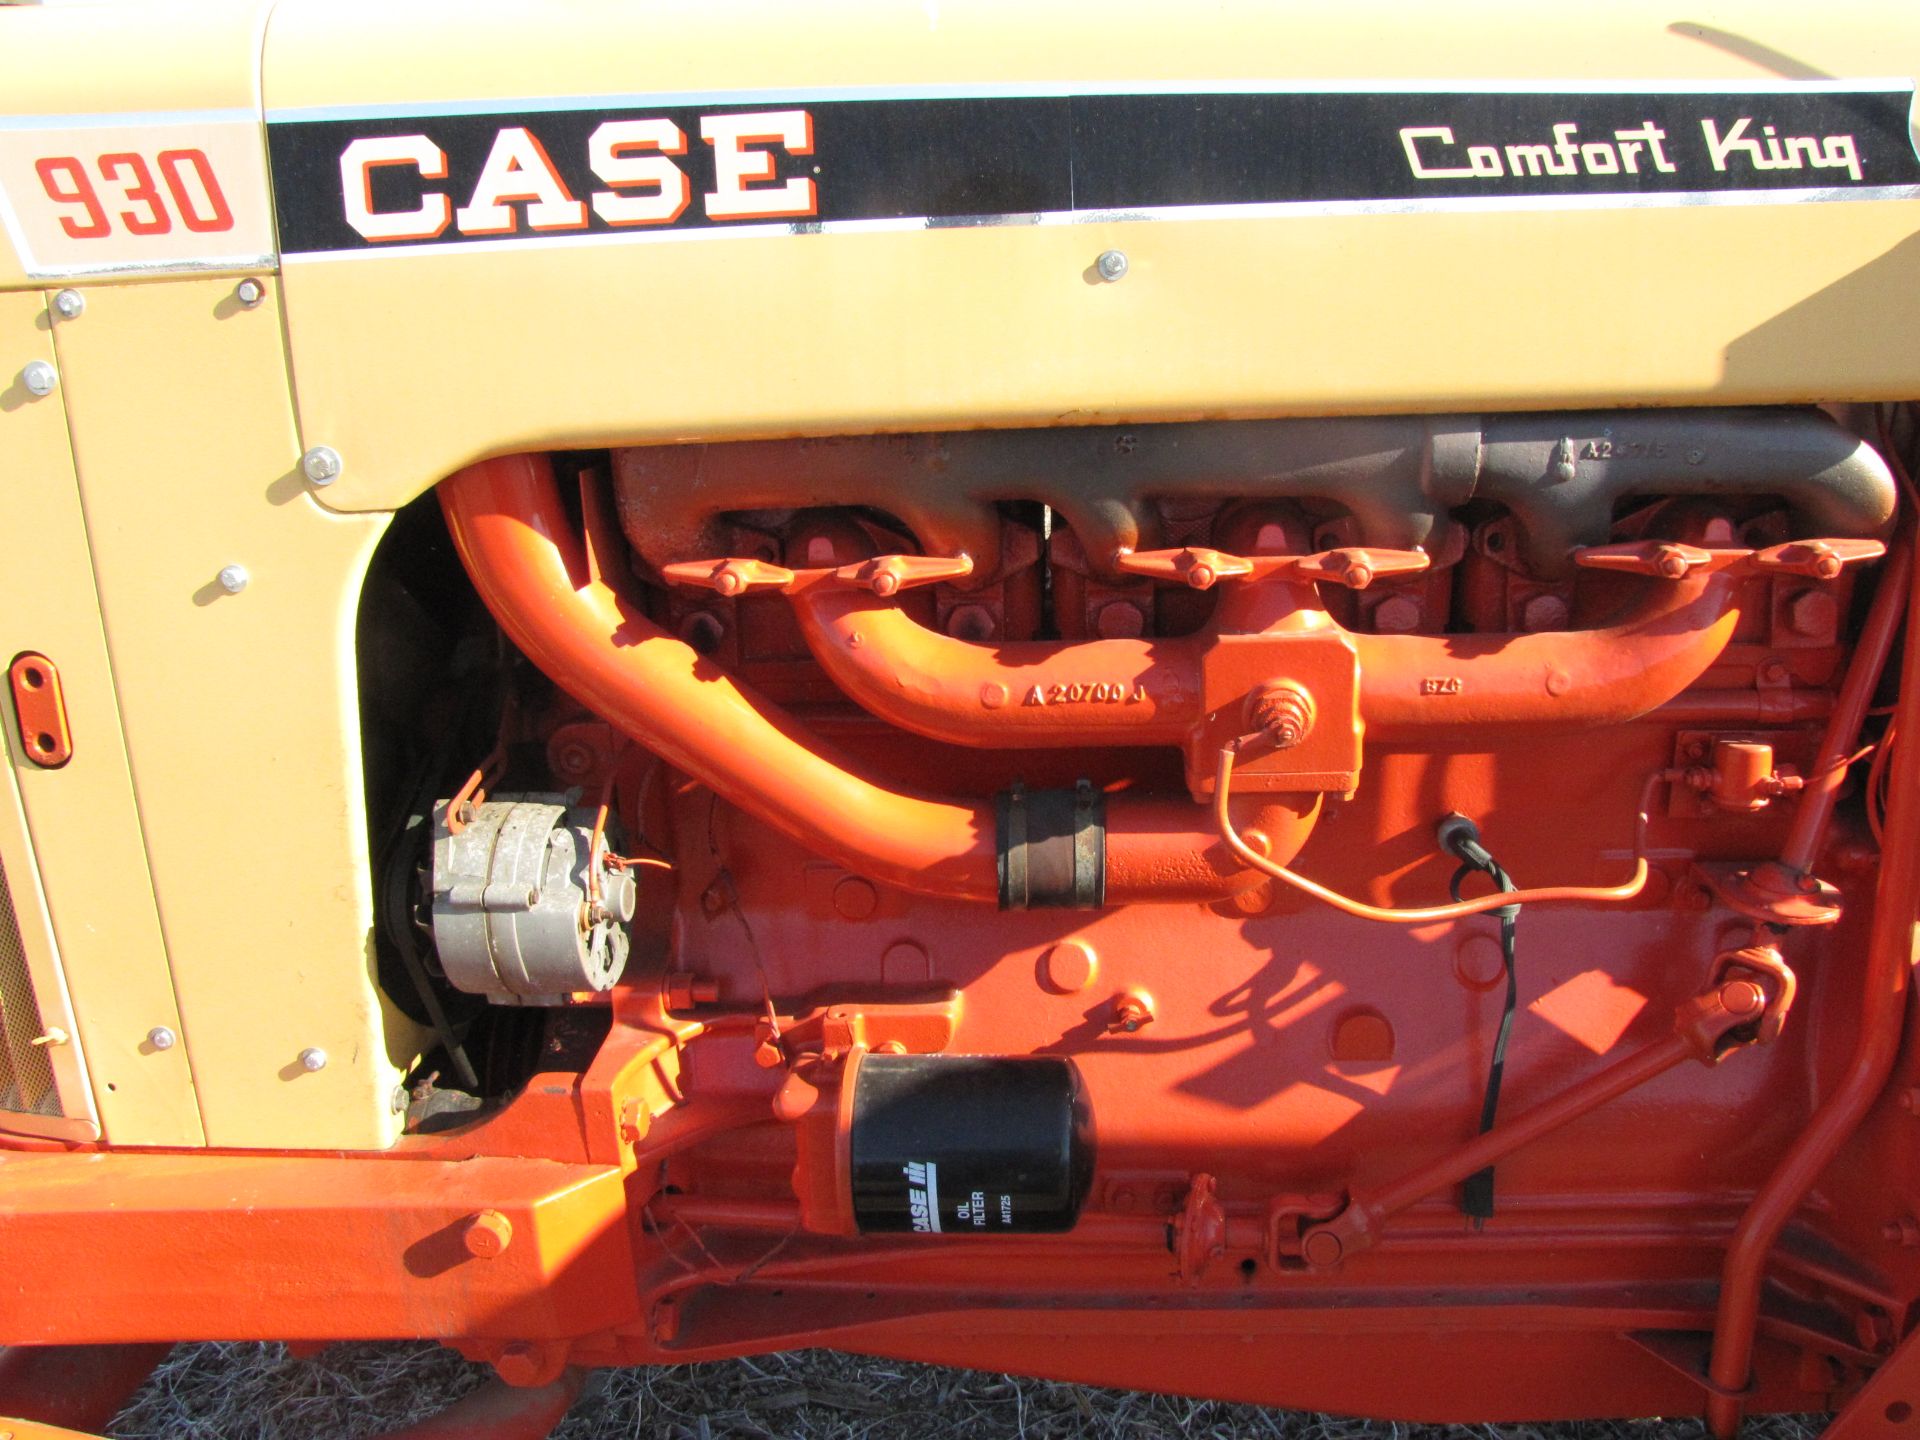 Case 930 Comfort King Tractor - Image 12 of 43